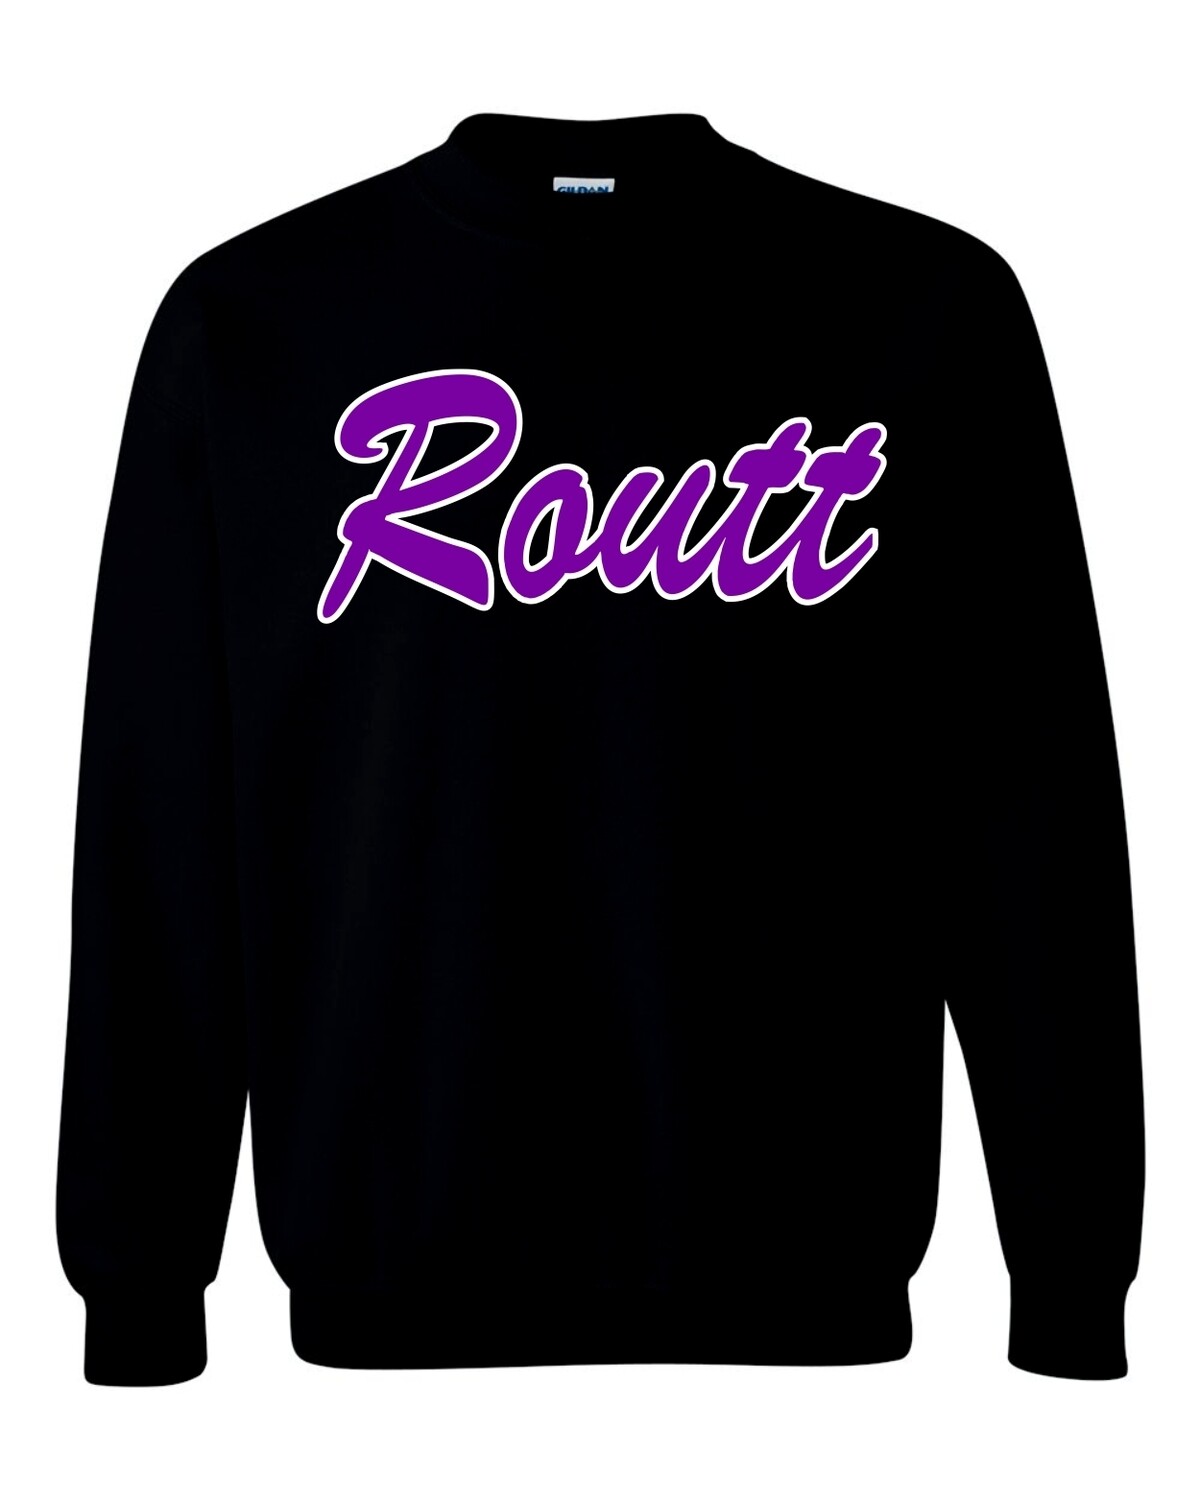 ROUTT BLACK 18000 (UNIFORMED APPROVED)